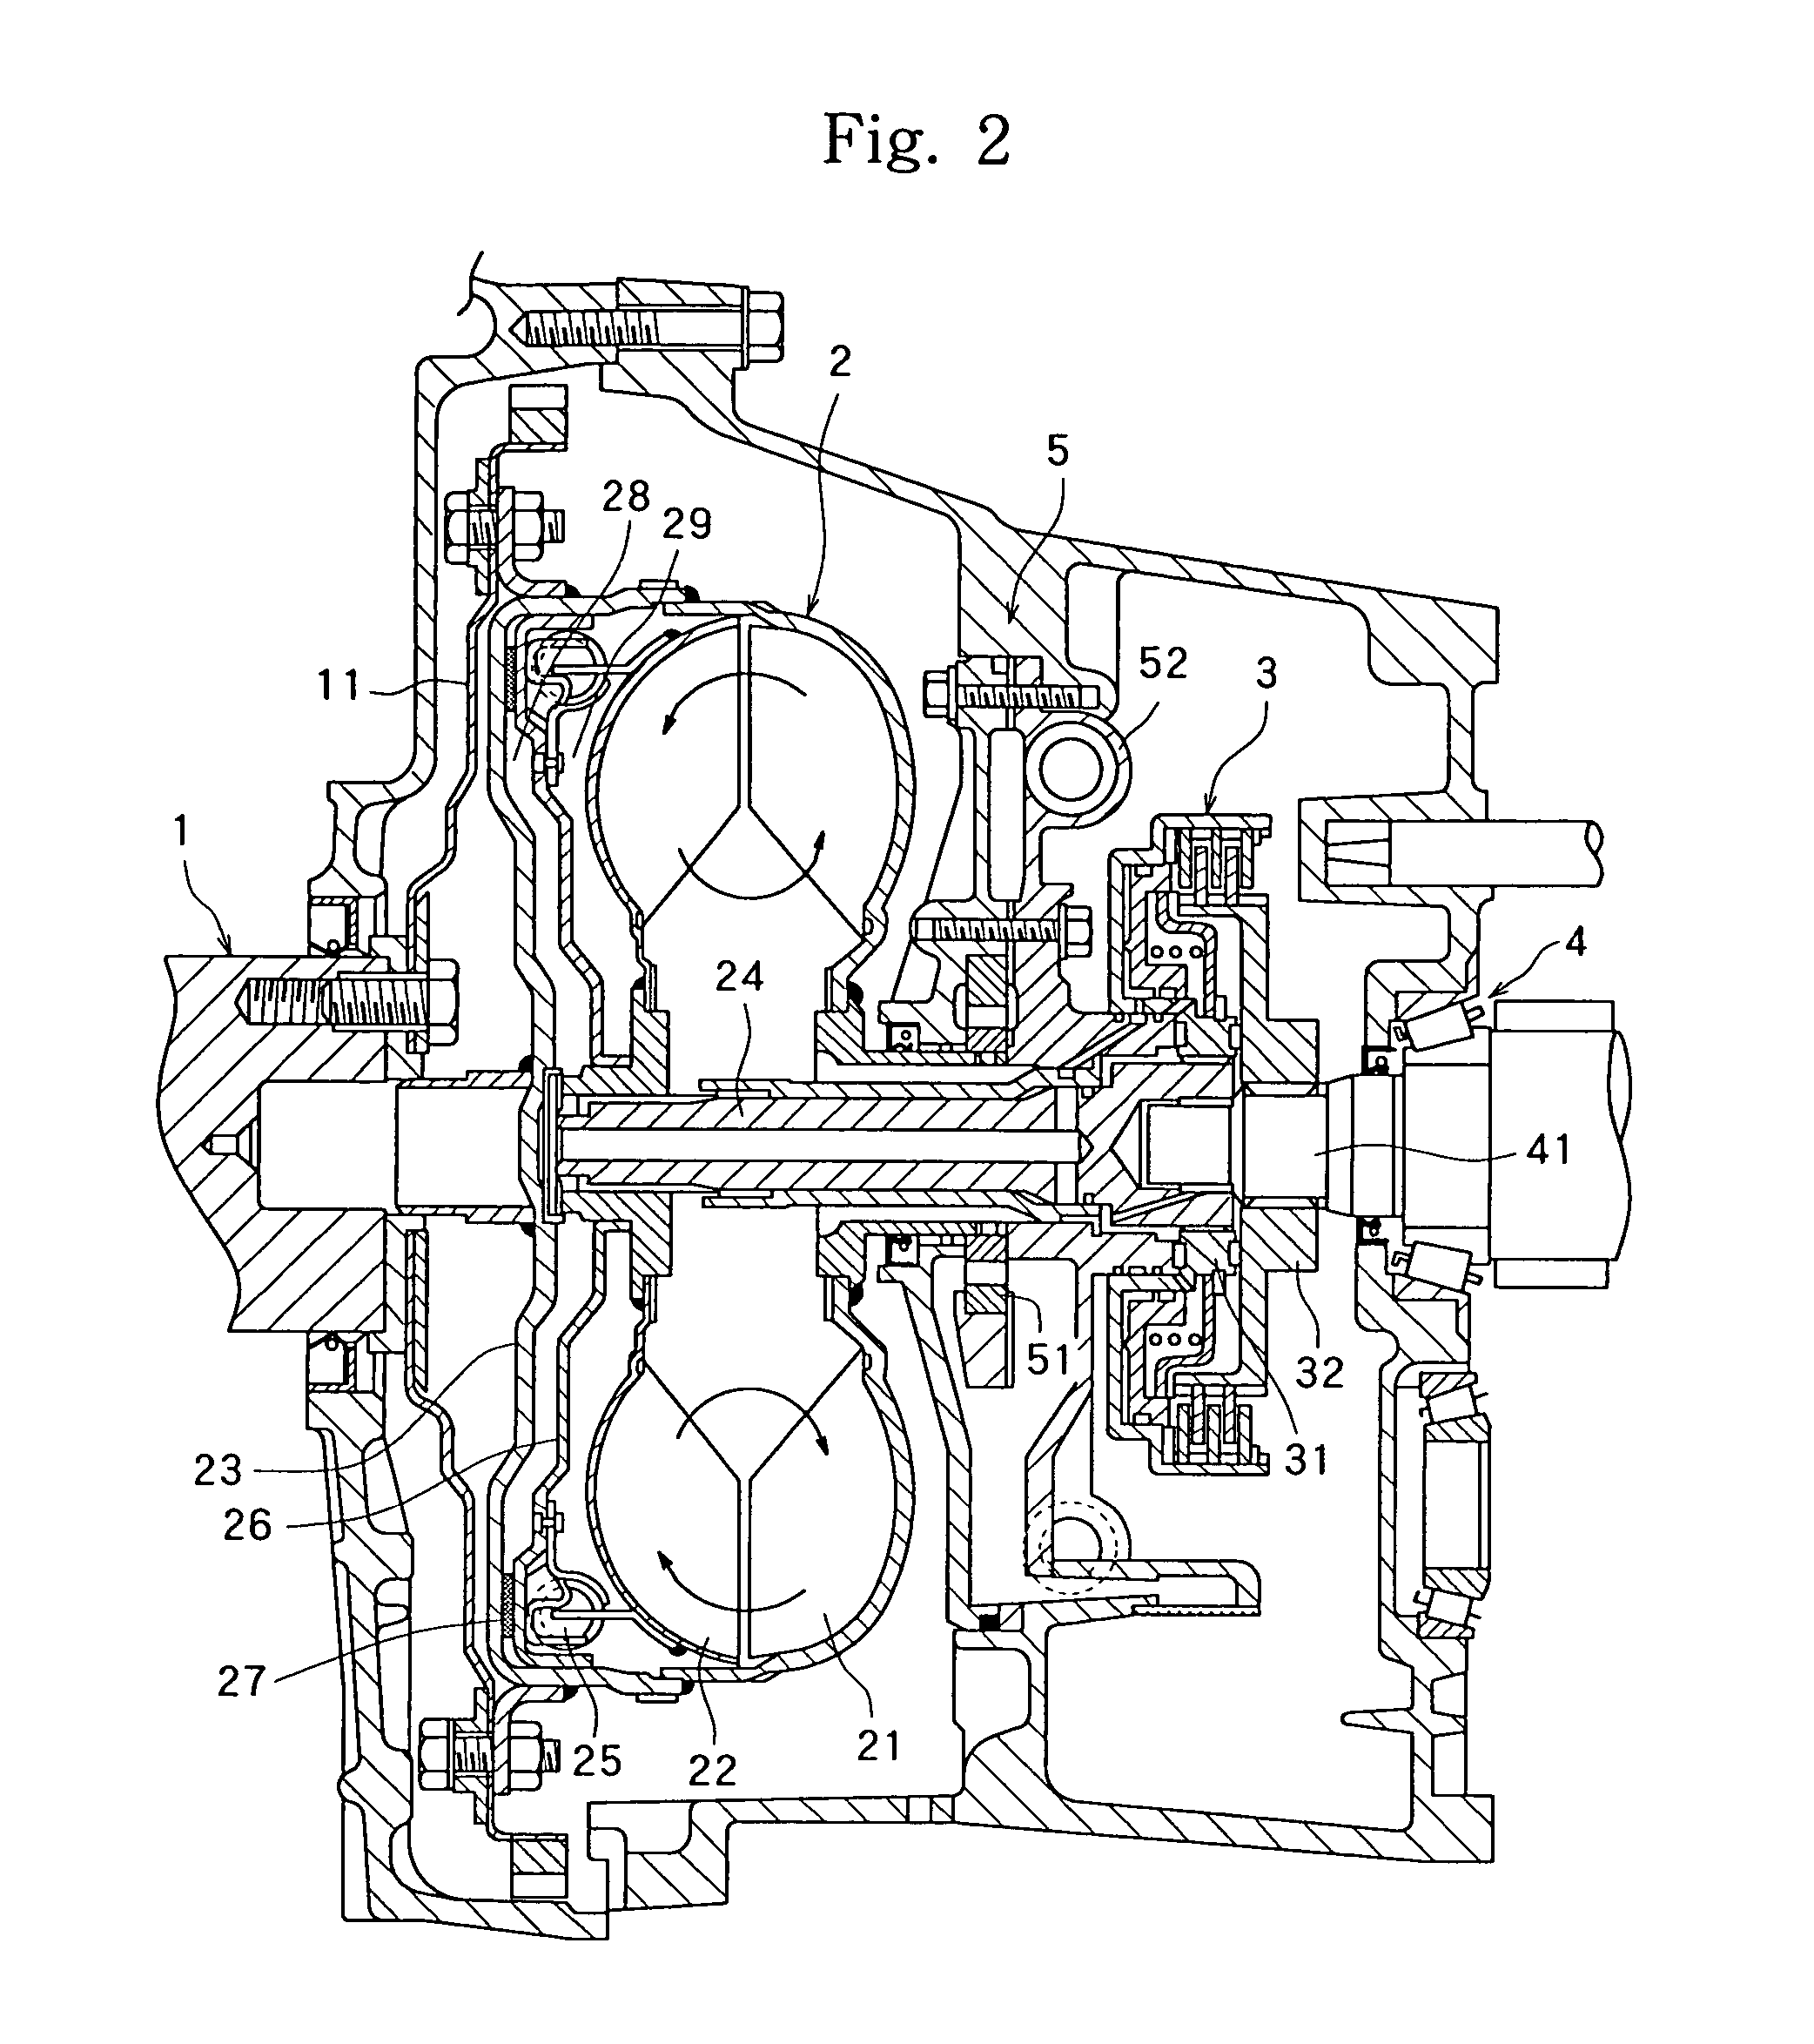 Vehicle Power Transmission Device Using A Fluid Coupling